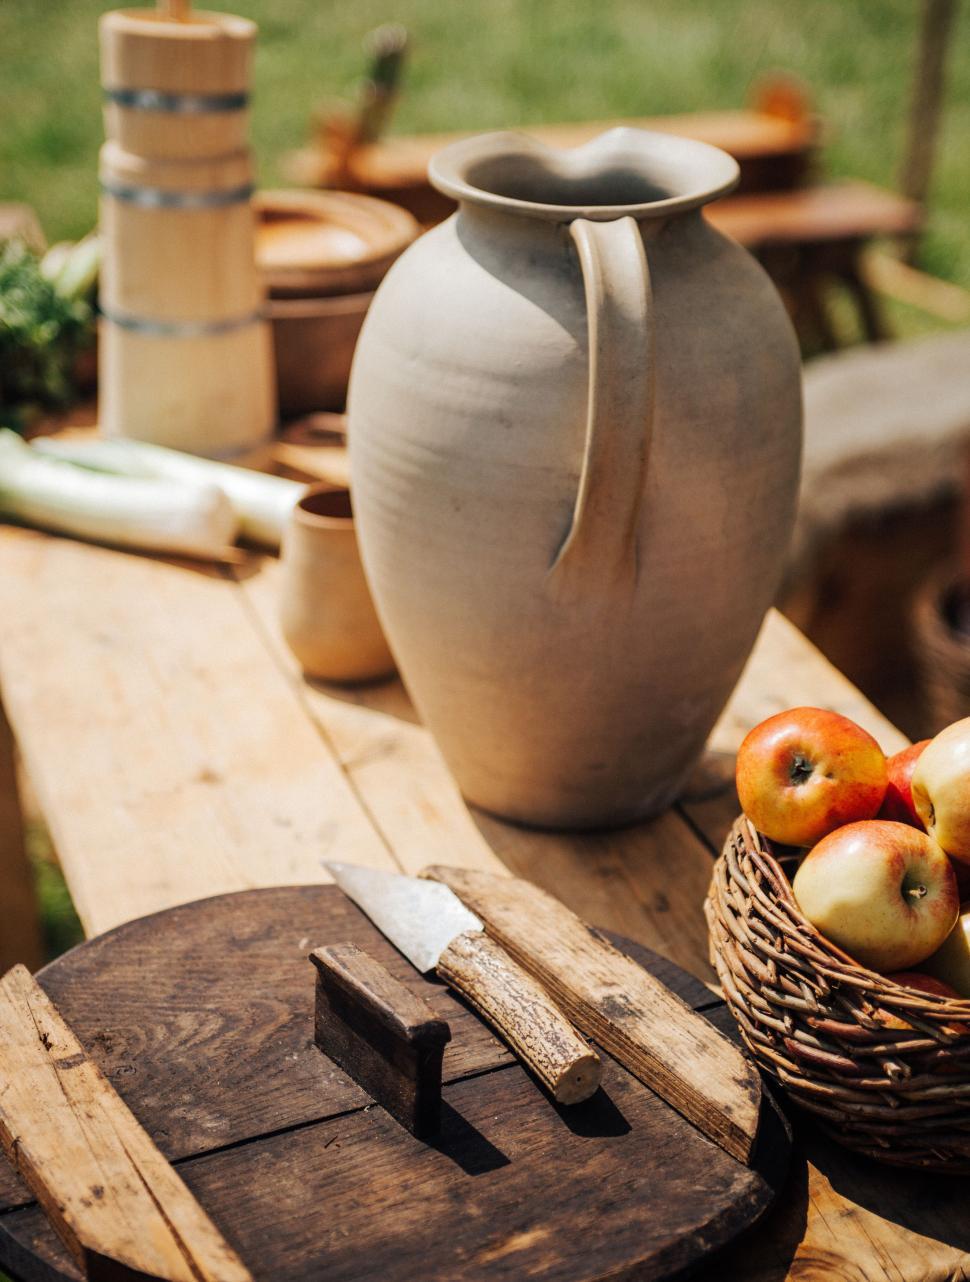 Free Image of Wooden Table With Basket of Apples 